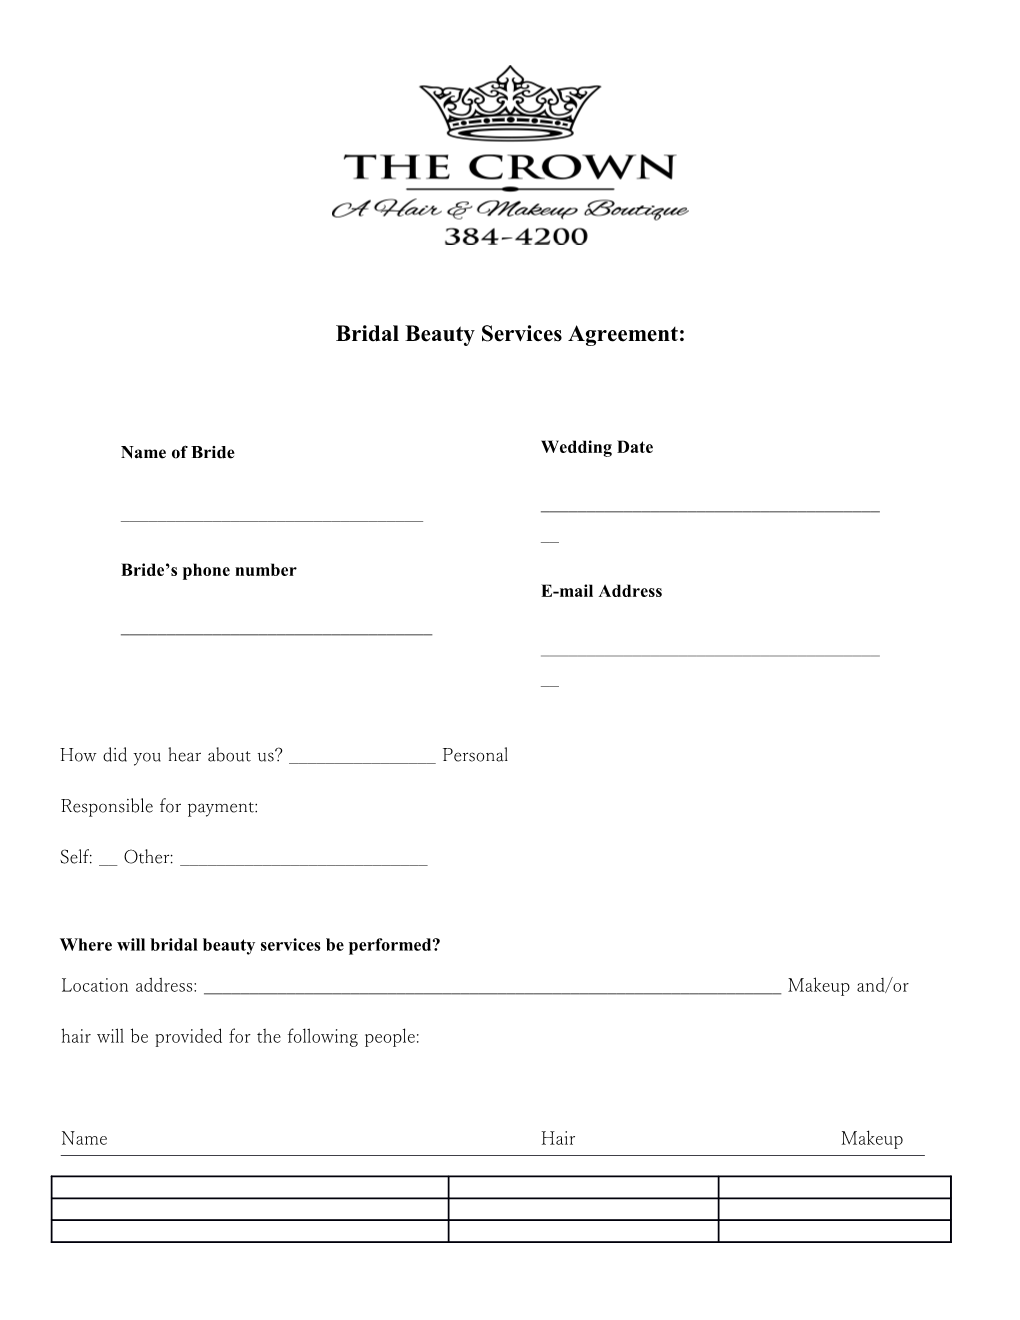 Bridal Beauty Services Agreement